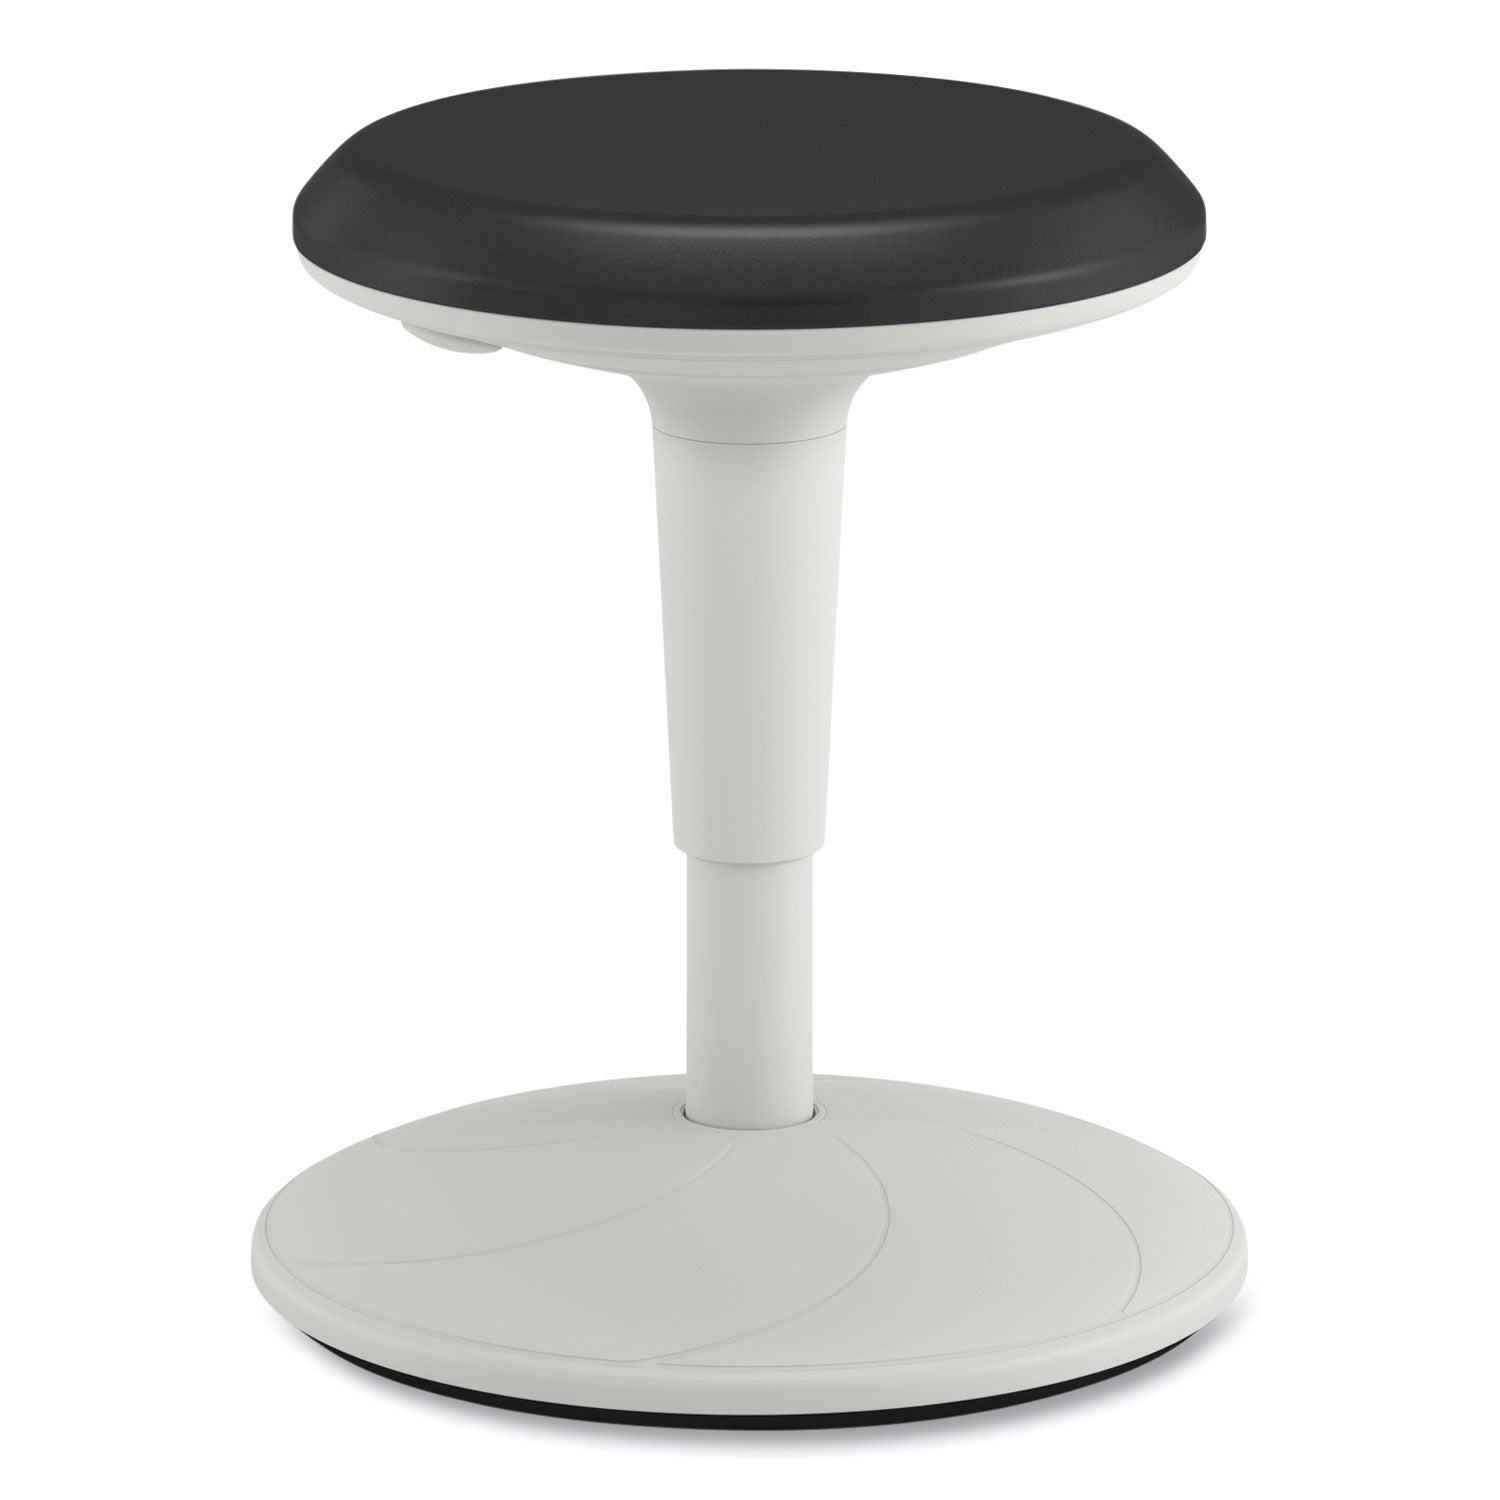 revel-adjustable-ht-fidget-stool-backlessup-to-250lb-1375-to-185-seat-htblack-seat-white-base-ships-in-7-10-bus-days_honhefs01bl - 1